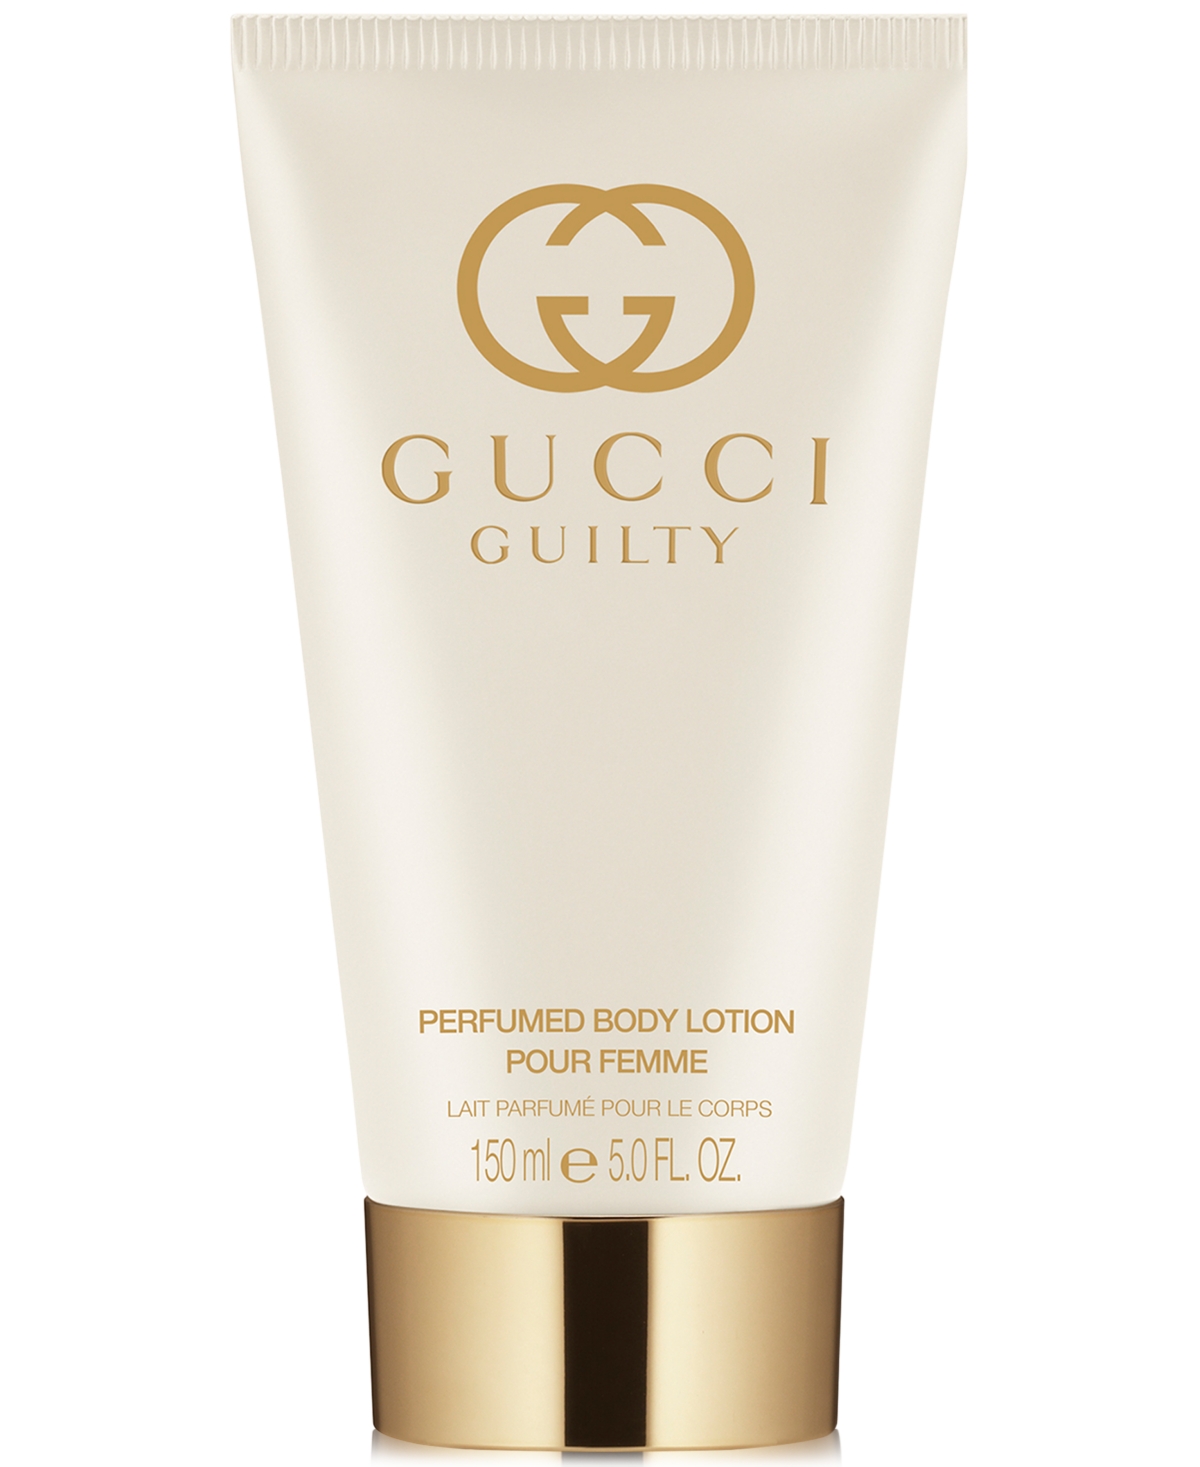 EAN 3614227758360 product image for Gucci Guilty Pour Femme Body Lotion, 5-oz. | upcitemdb.com